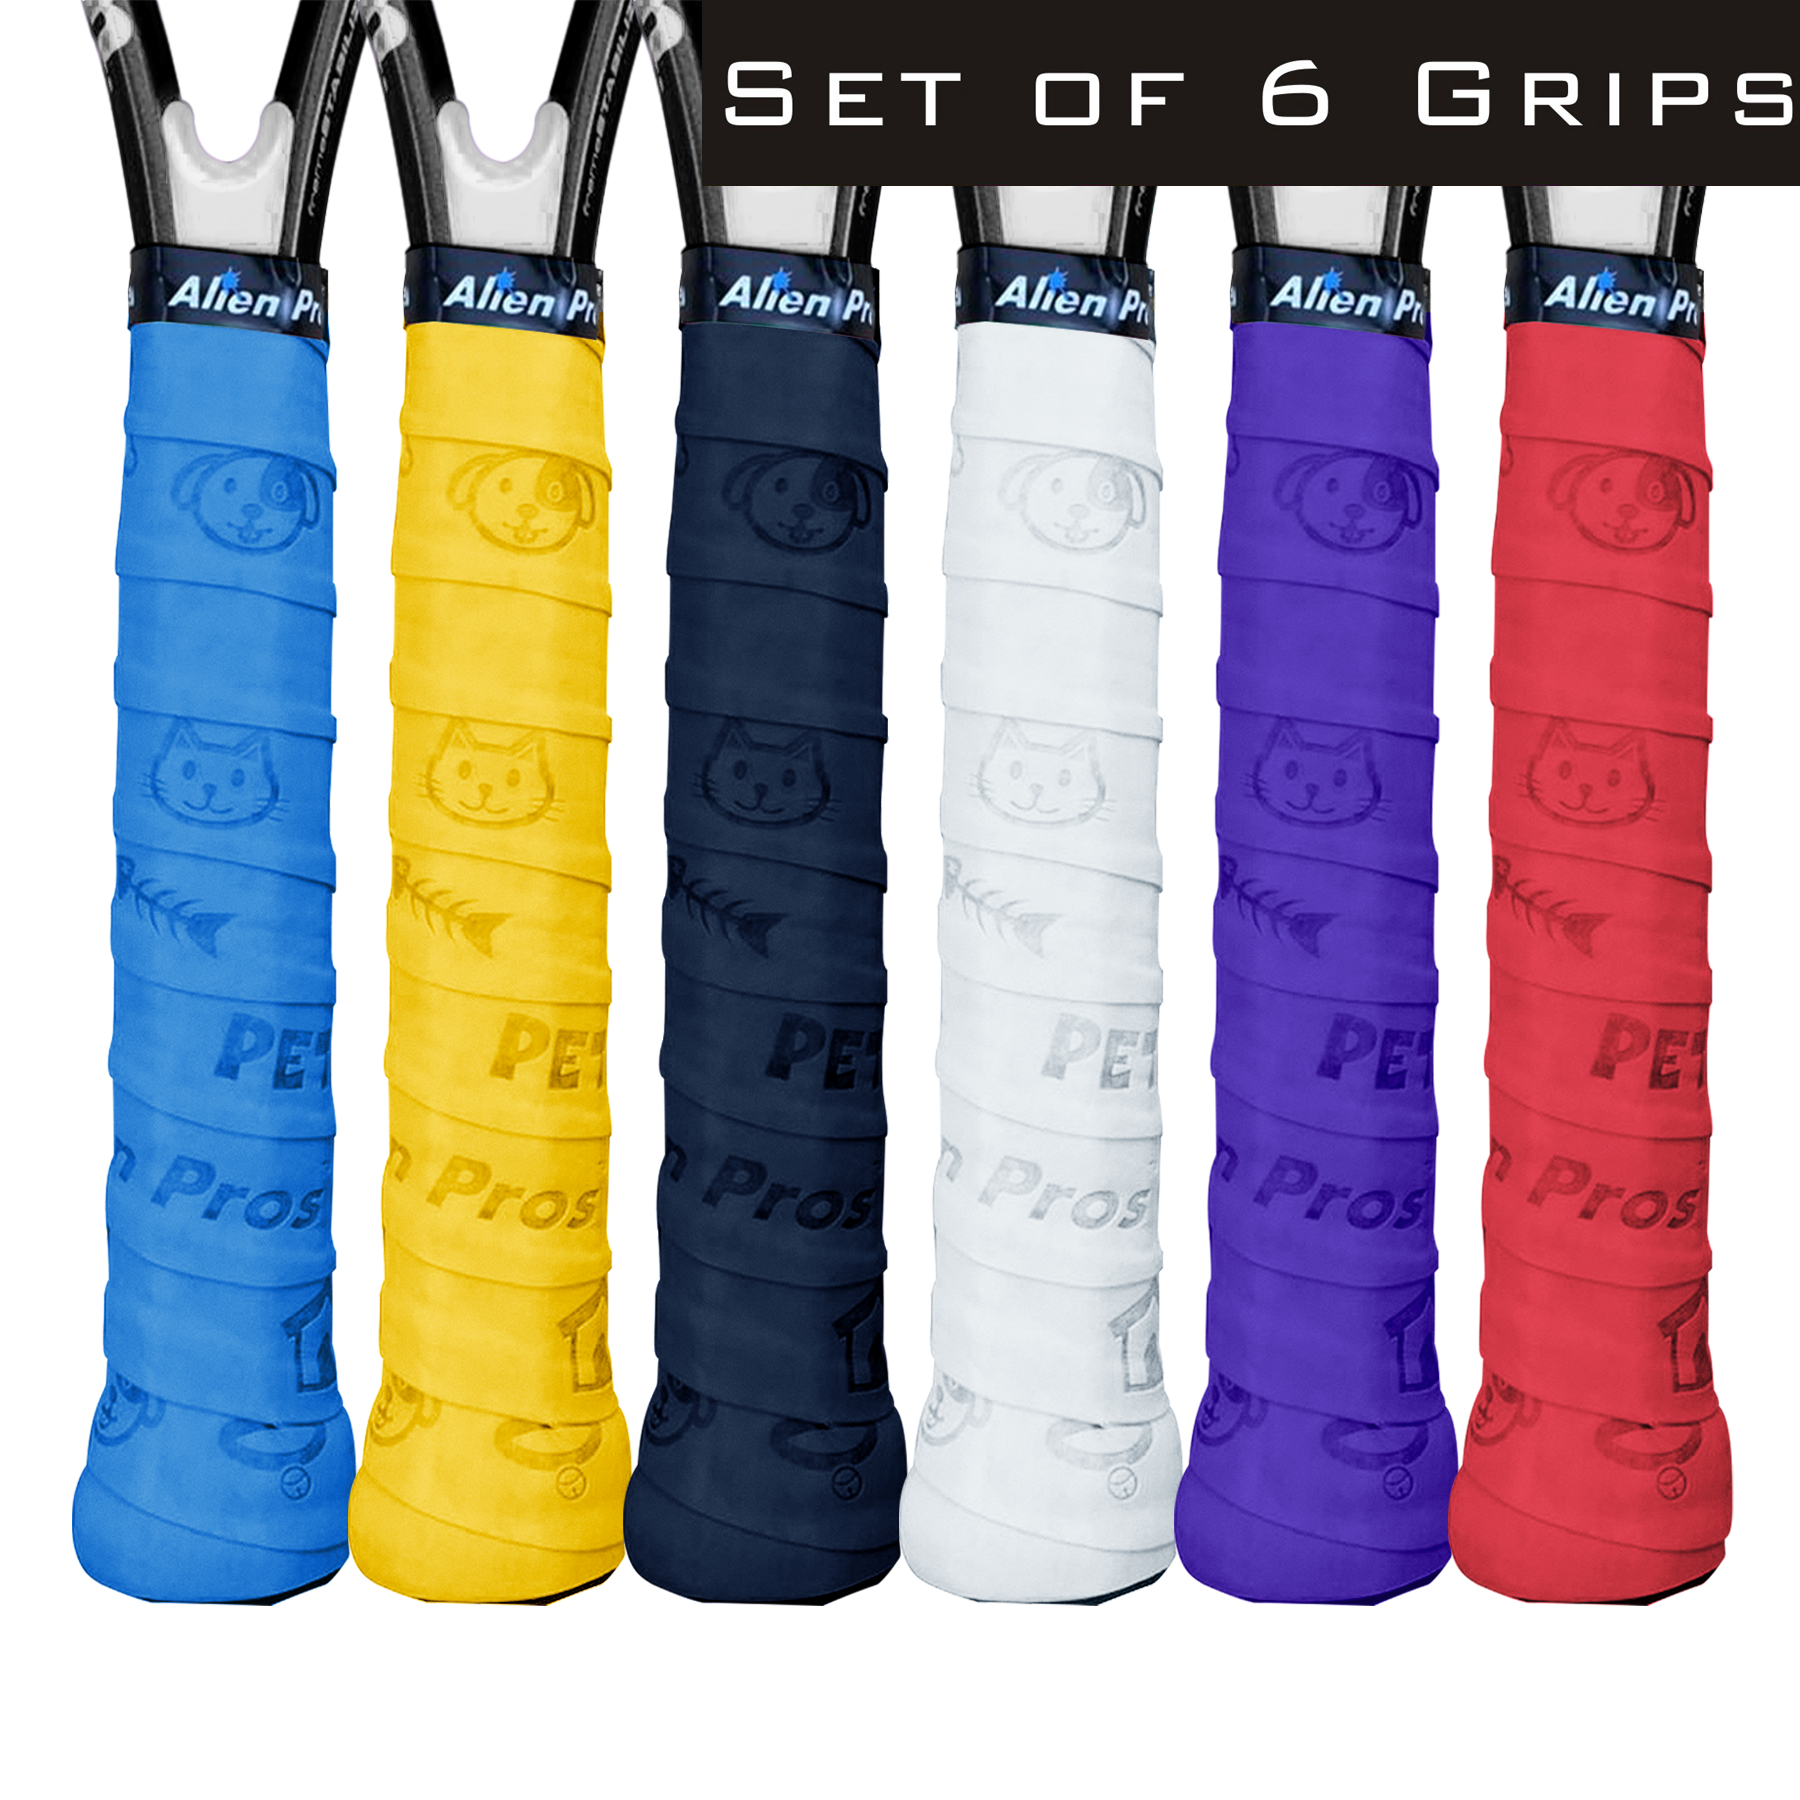 Wholesale Tennis Overgrips & Accessories for Tennis Players 